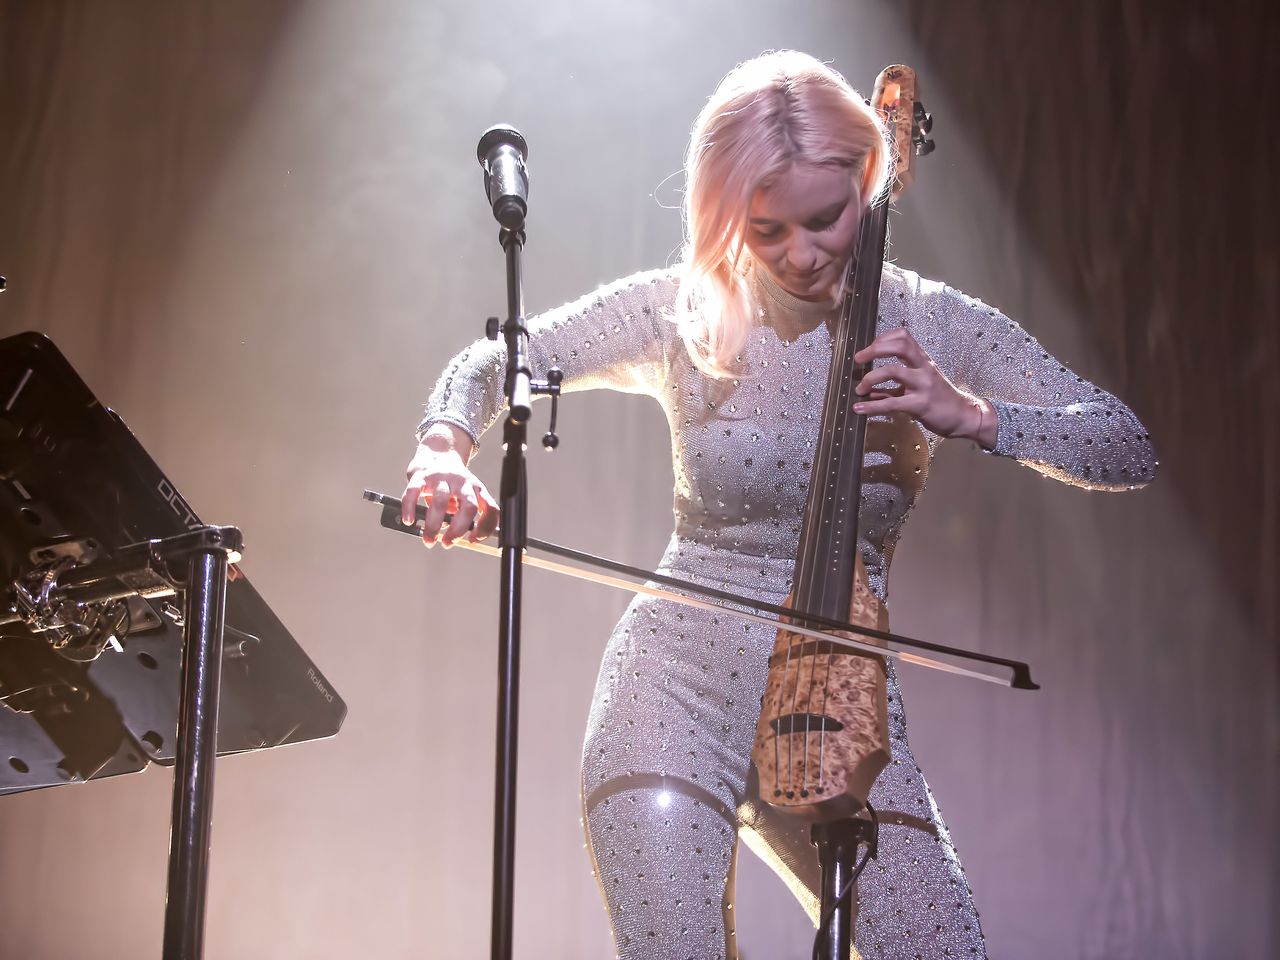 Grace Chatto performing as part of Clean Bandit last year